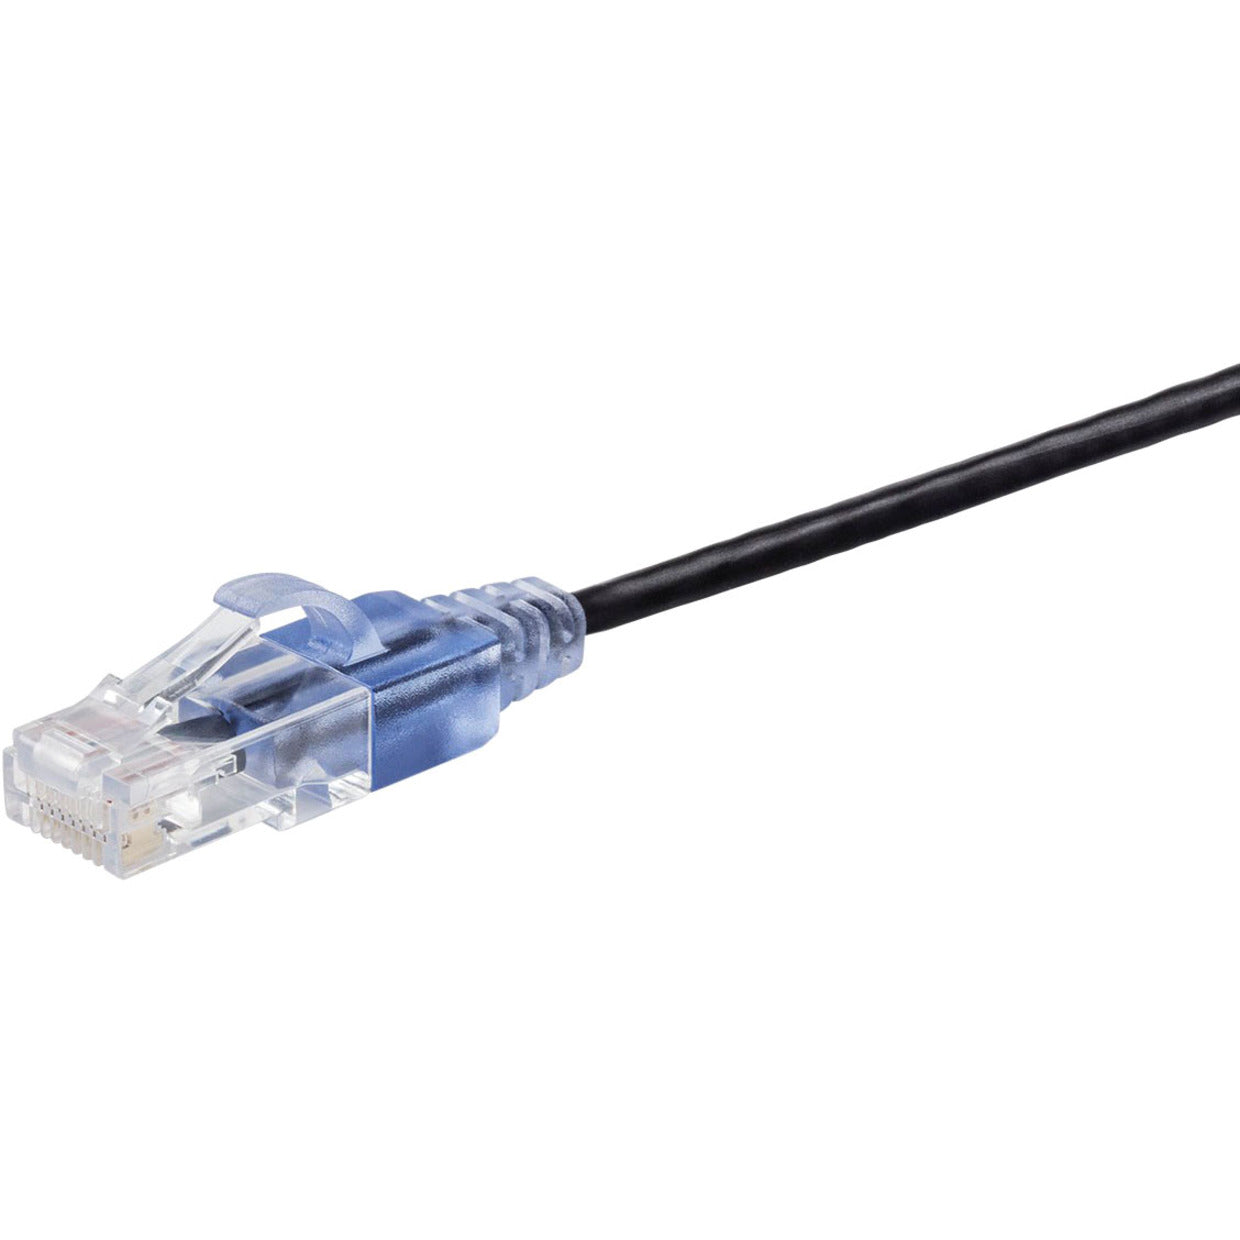 Monoprice 15129 SlimRun Cat6A Ethernet Network Patch Cable 3ft Black, 5-Pack